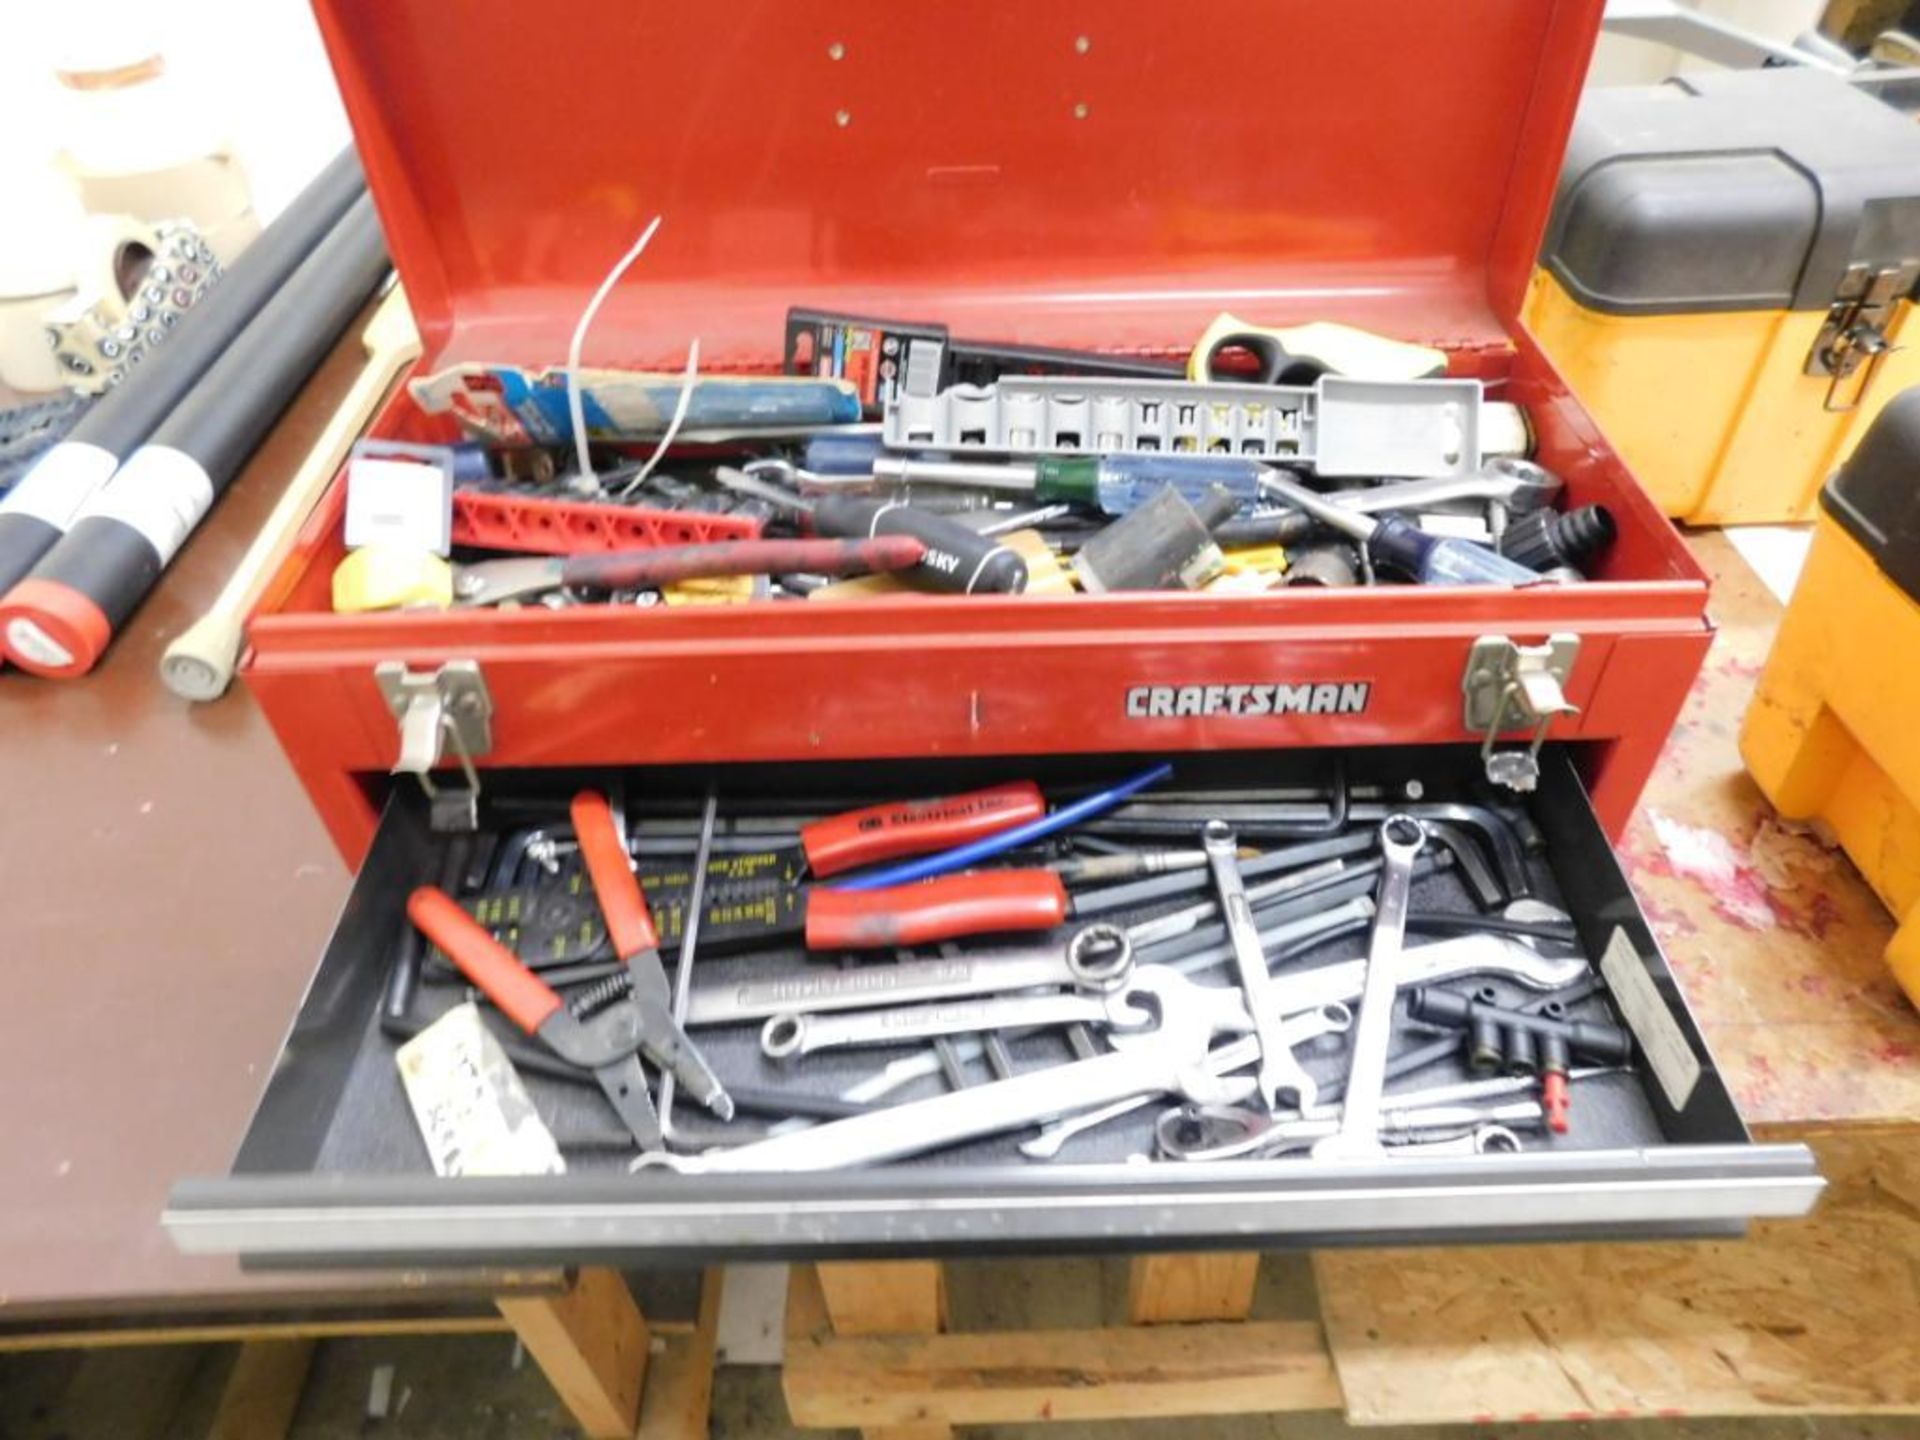 LOT: Craftsman 3-Drawer Tool Box with Top Storage, with Contents (LOCATED IN ST. AUGUSTA, MN.) - Image 2 of 4